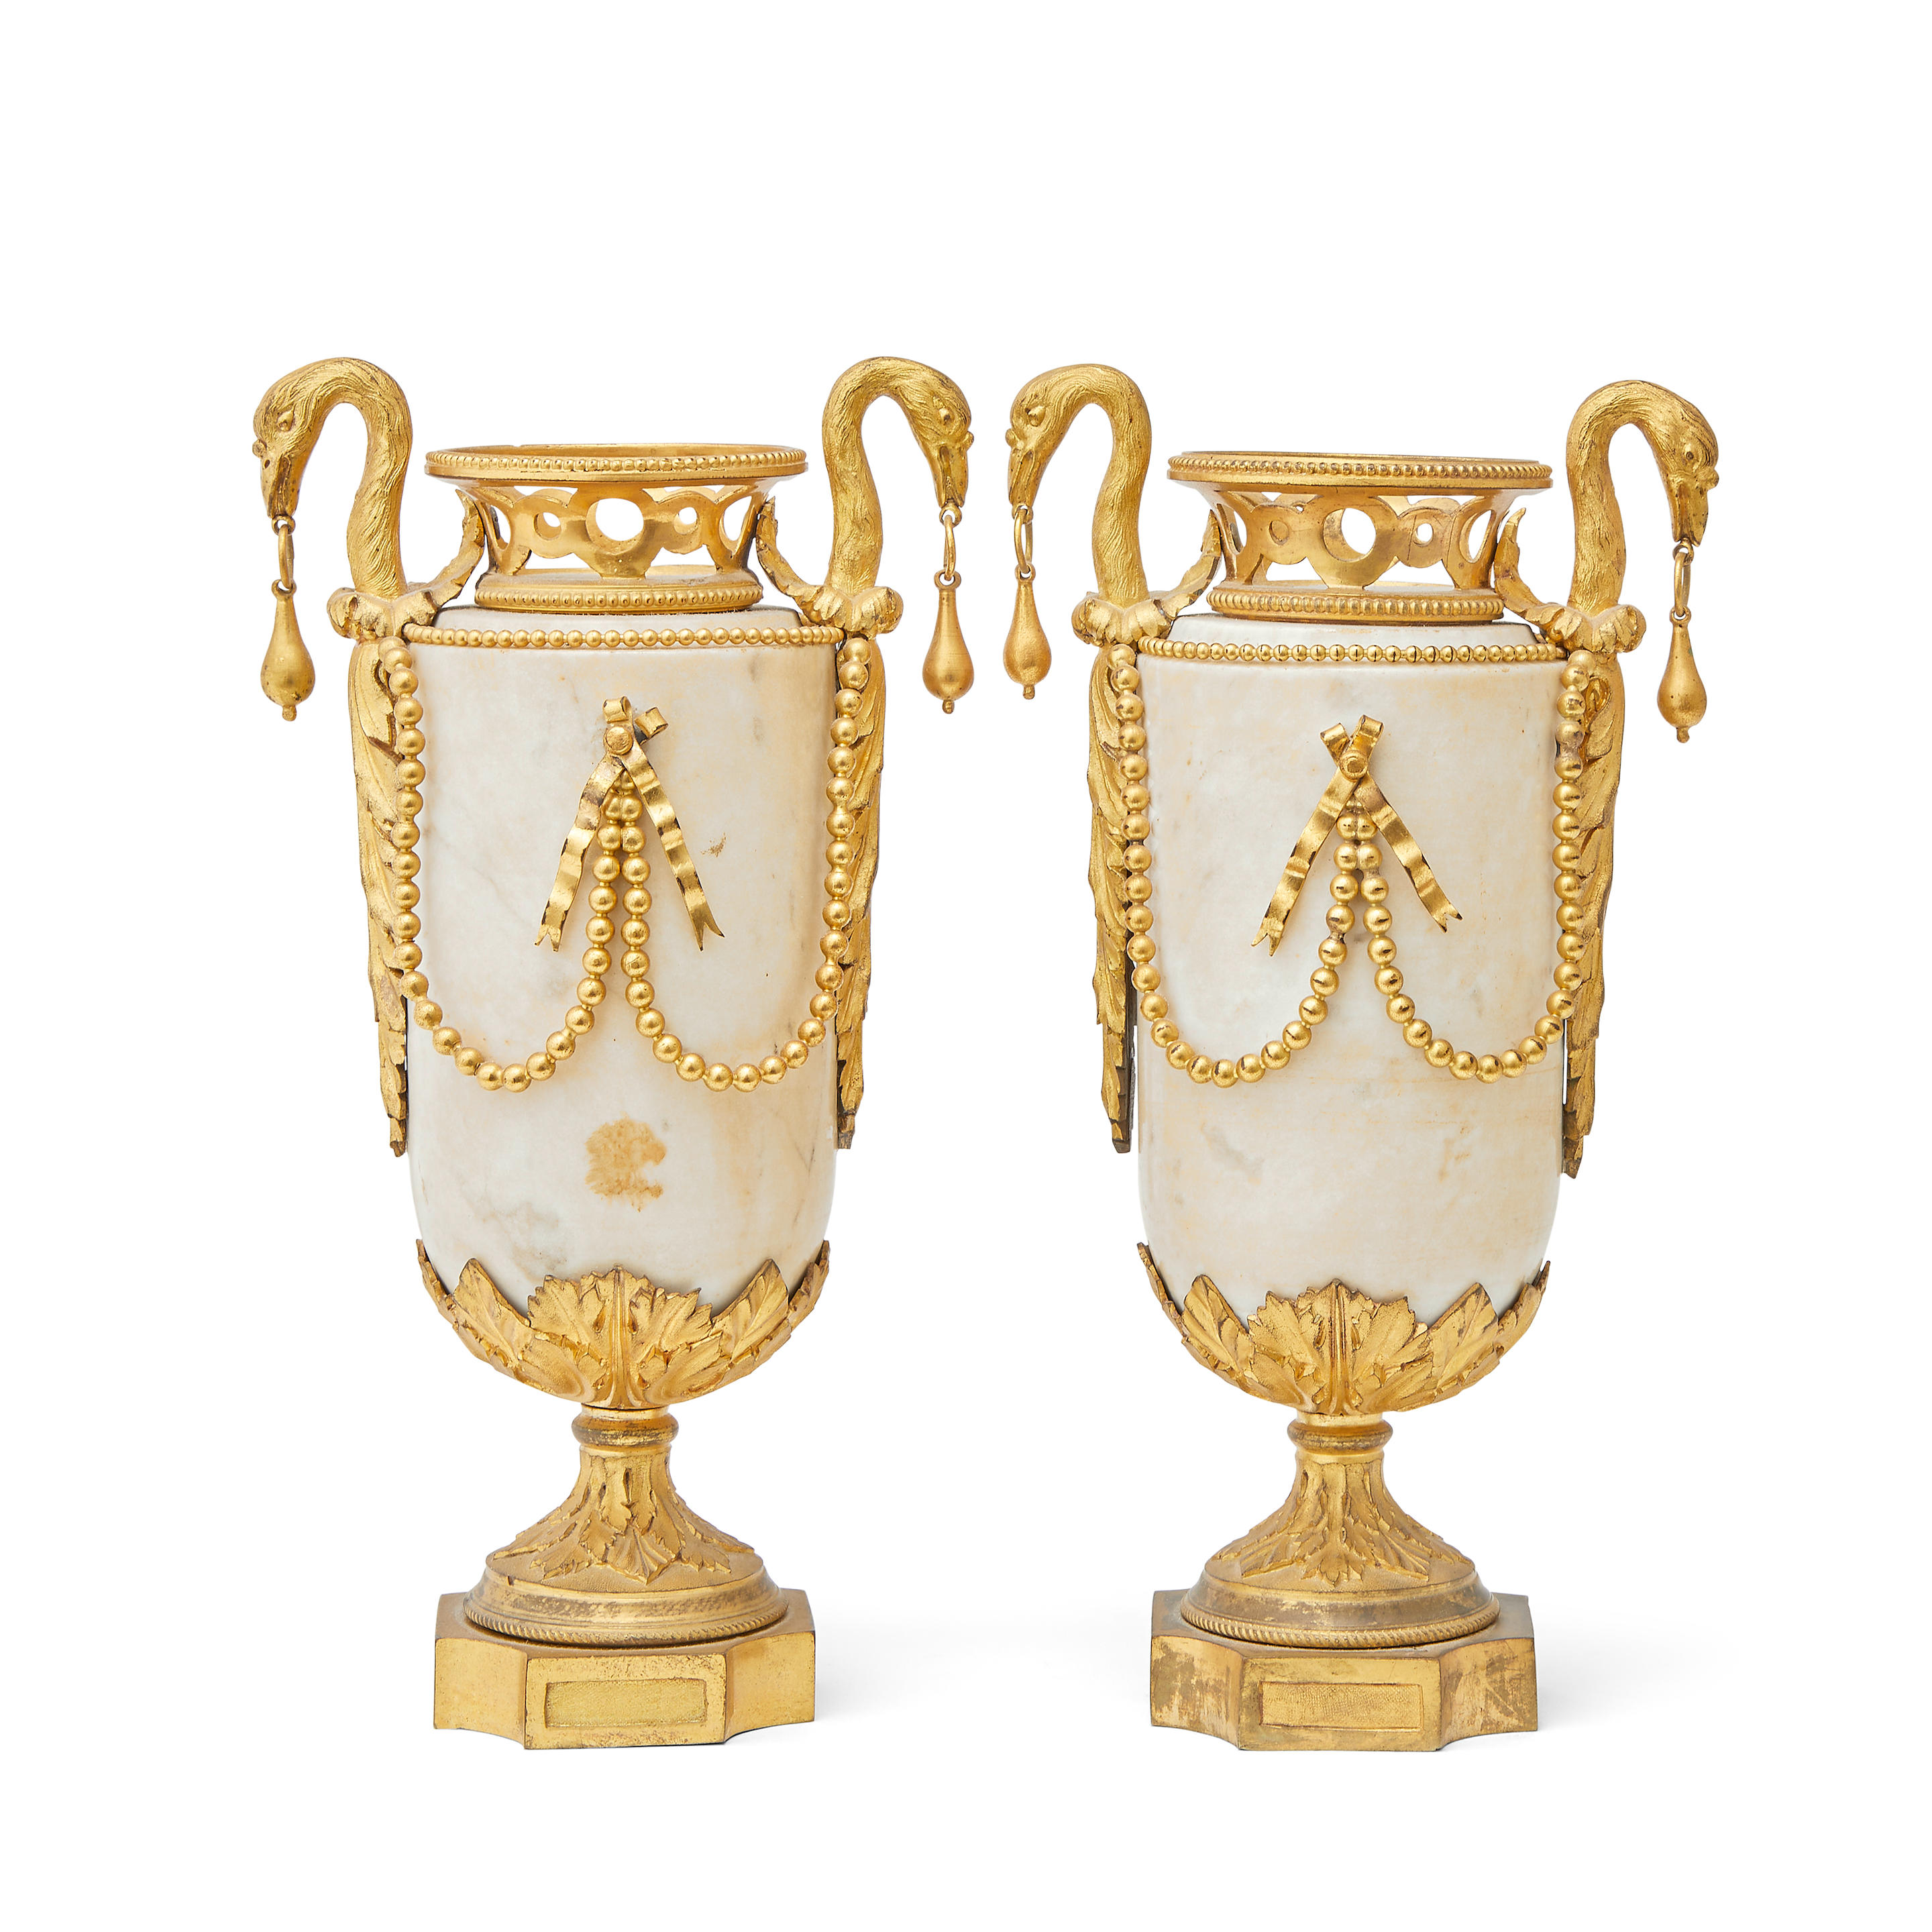 Bonhams : A pair of French ormolu mounted verde antico marble twin handled  garniture vases In the Louis XVI style, probably second quarter 19th century